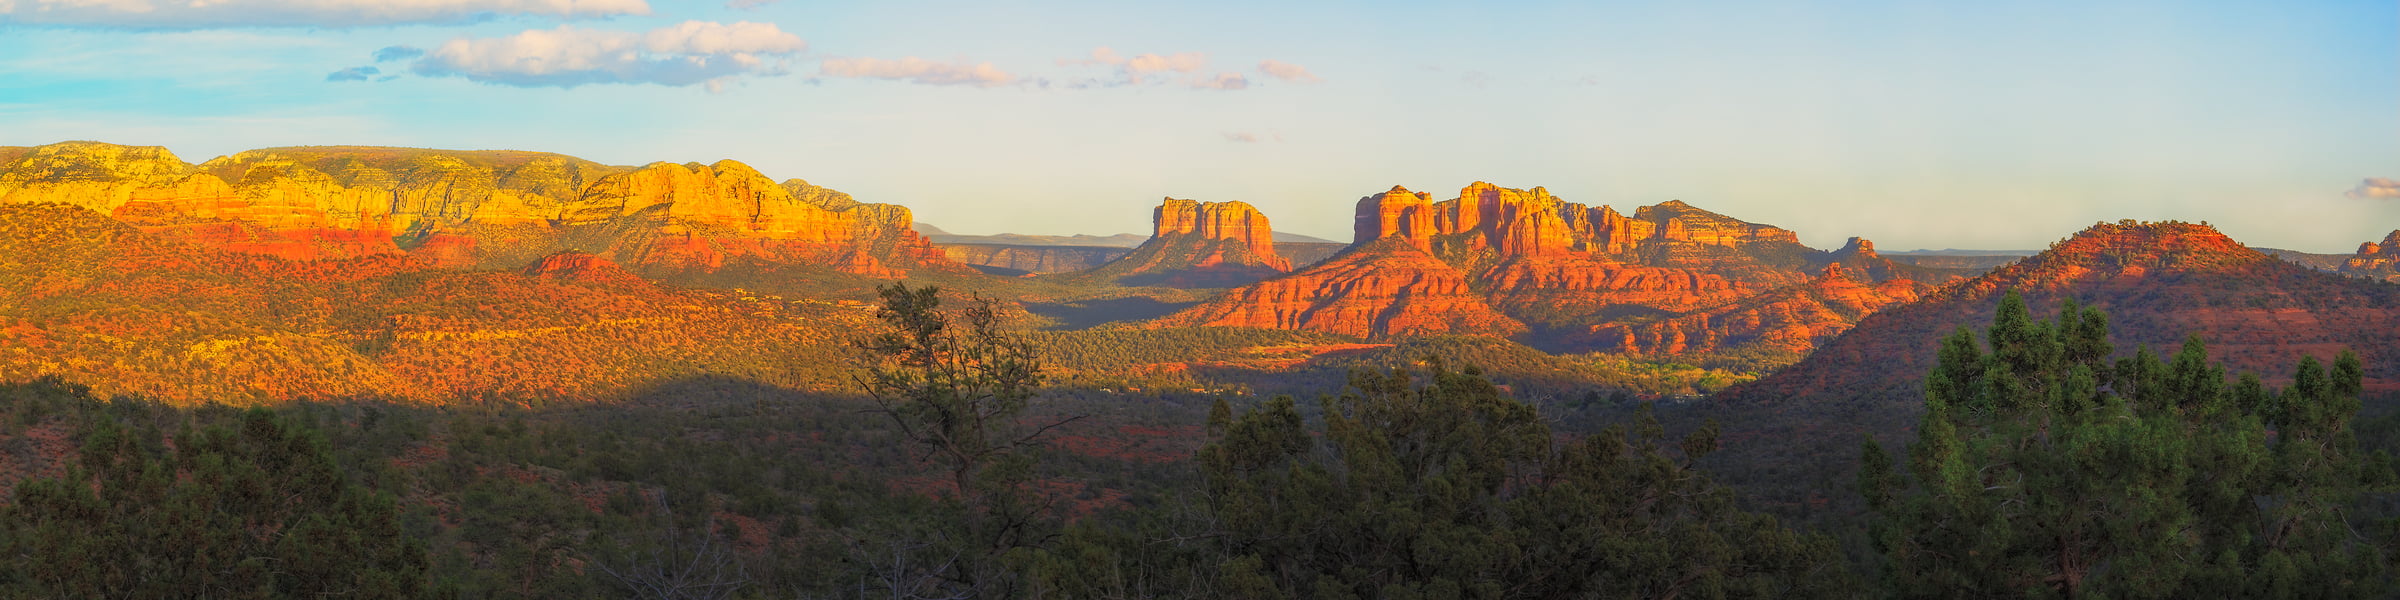 1,435 megapixels! A very high resolution, large-format VAST photo print of a scenic landscape in Sedona, Arizona; photograph created by John Freeman